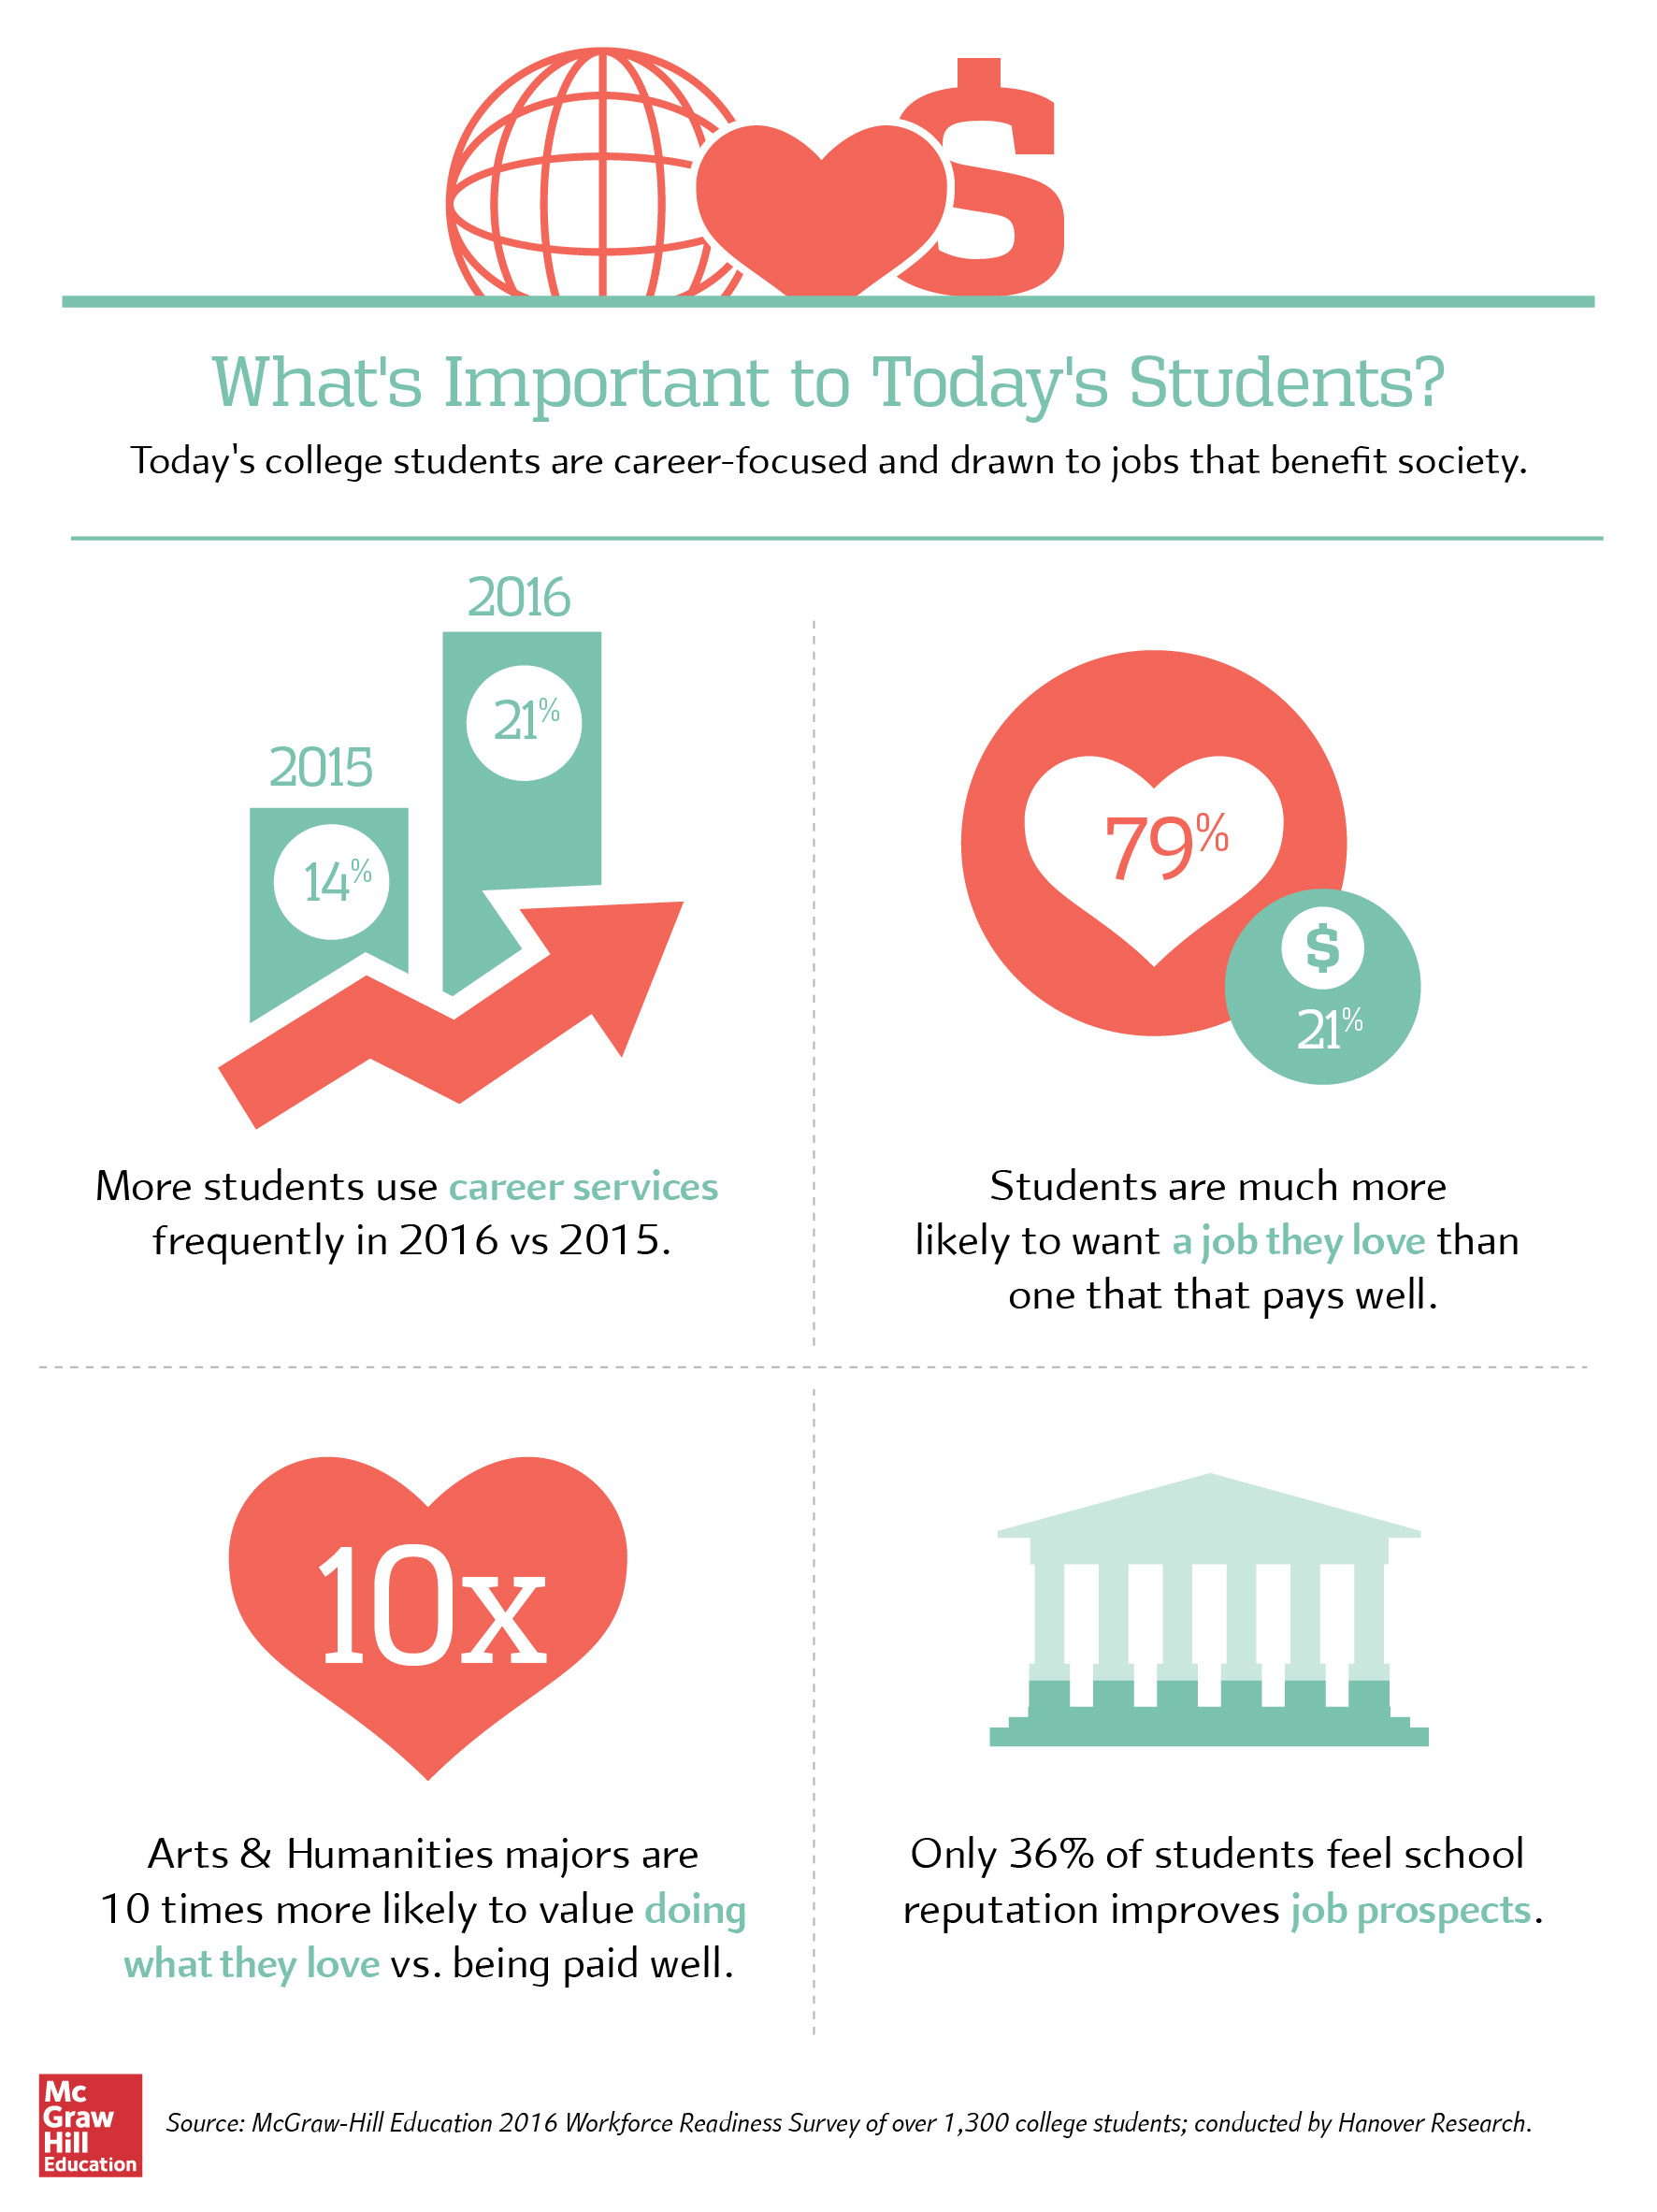 What’s Important to Students?